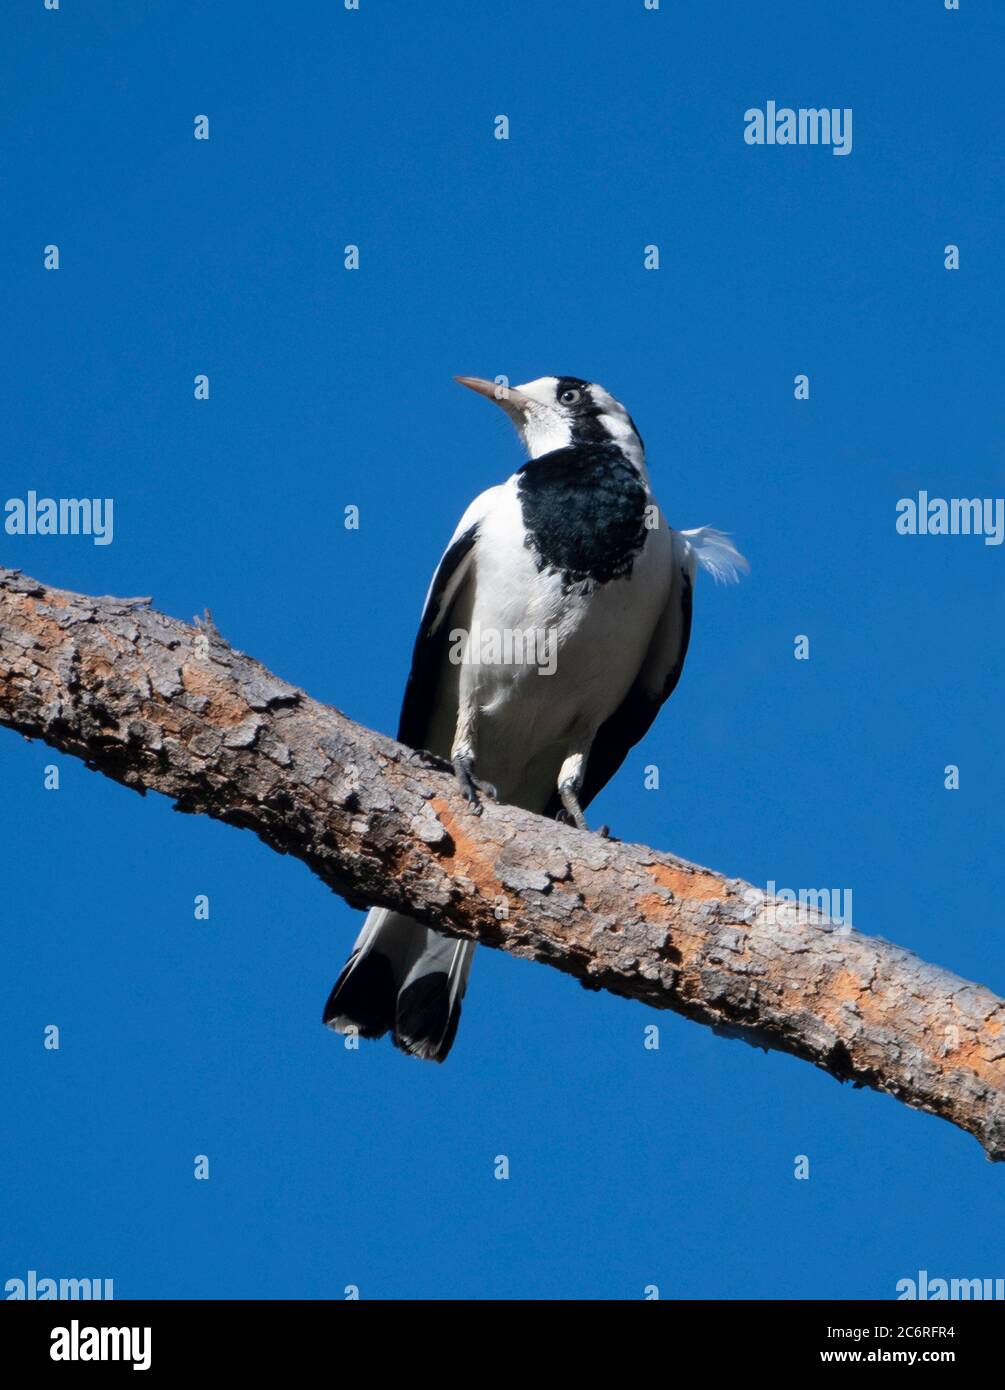 Vertical portrait of a Magpie Lark (Grallina cyanoleuca) perched on a branch, Northern Territory, NT, Australia Stock Photo